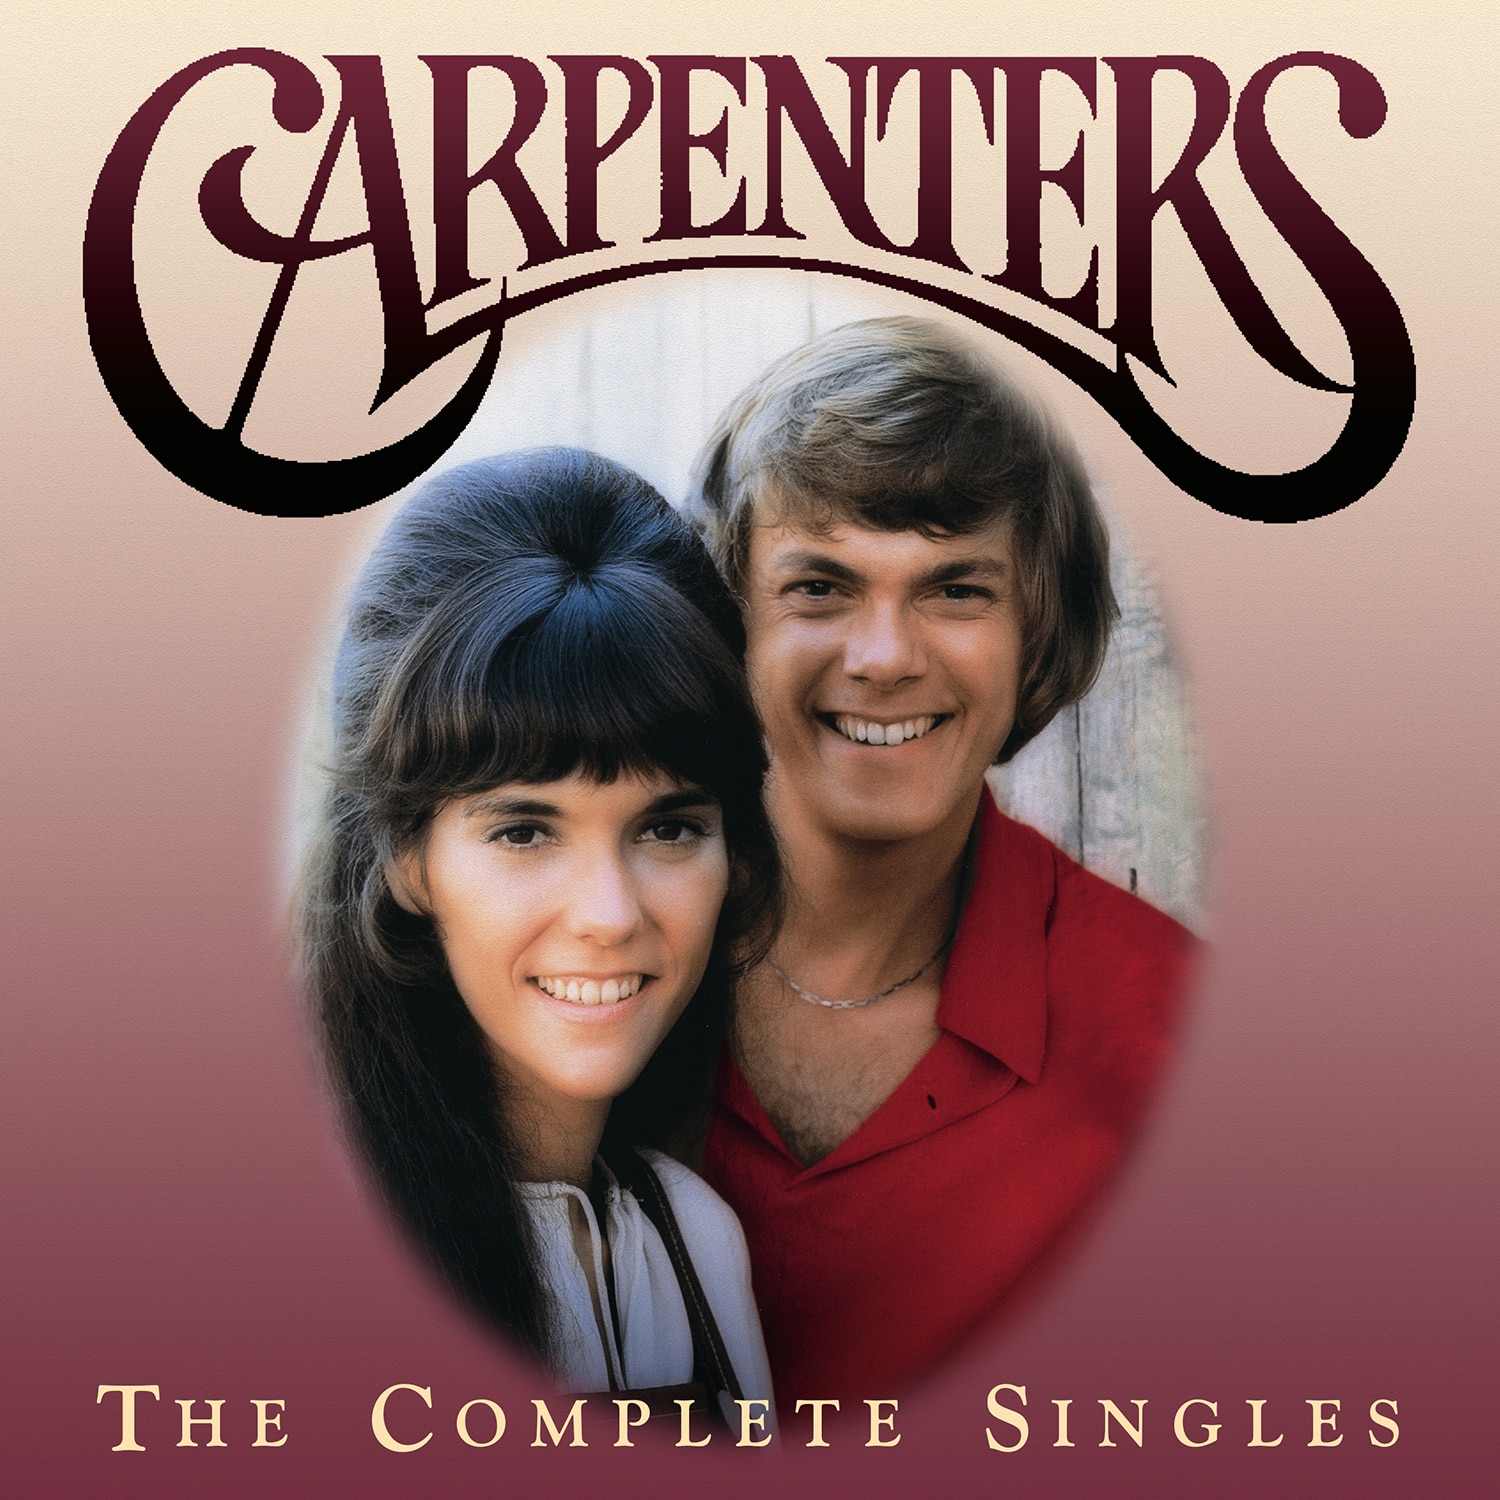 exclusive-it-s-yesterday-once-more-carpenters-complete-singles